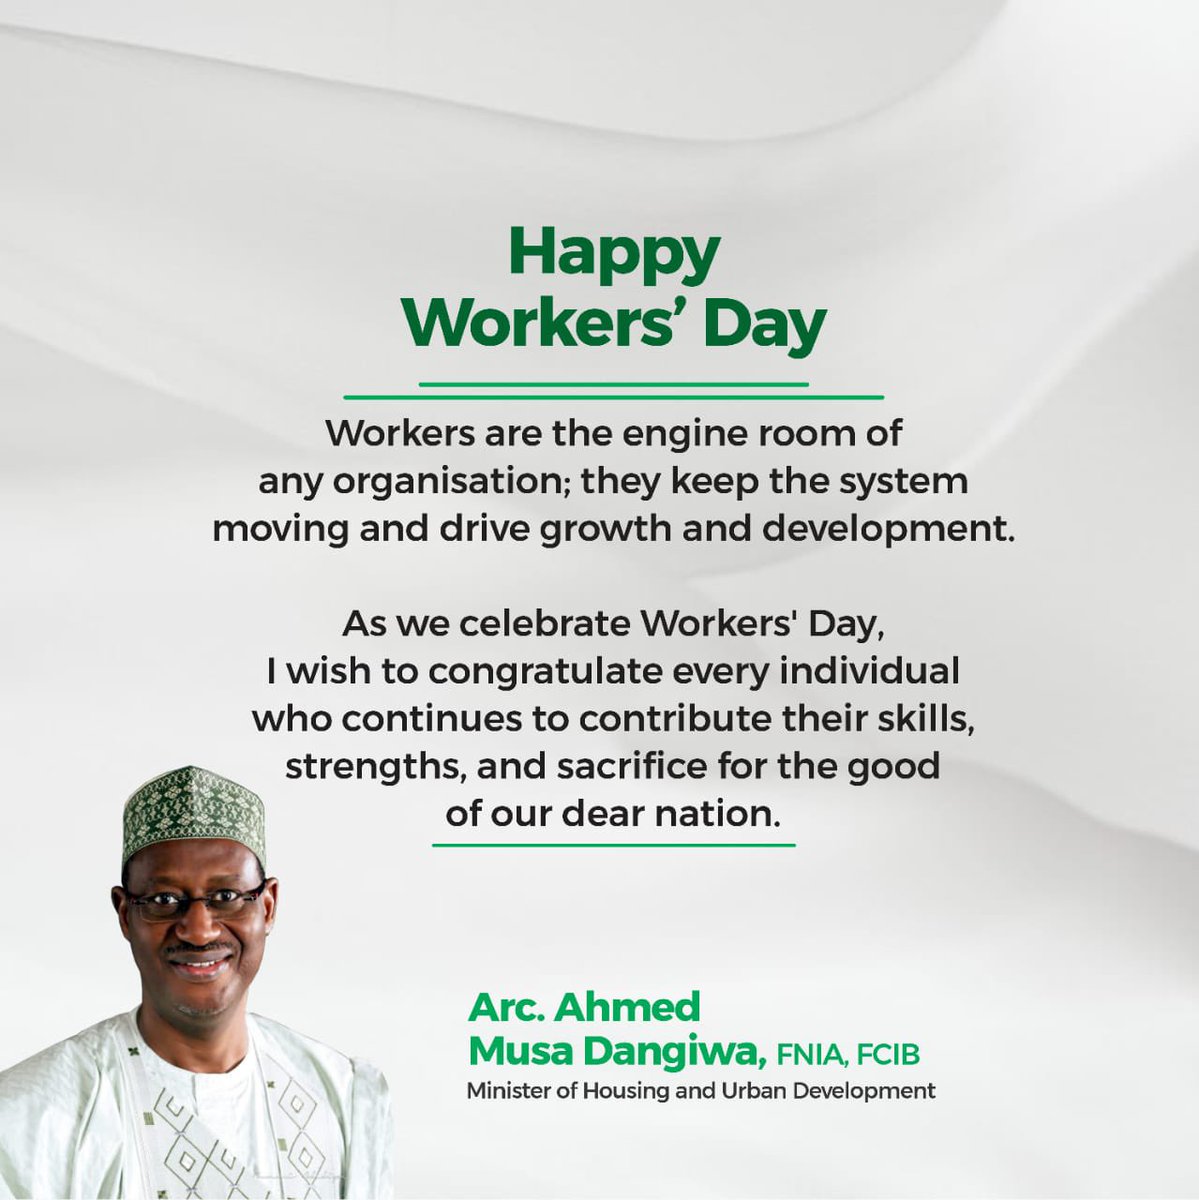 As we celebrate Workers’ Day, I wish to congratulate every individual who contributes their skills, strengths and sacrifice for the good of our dear nation. Happy Workers’ Day